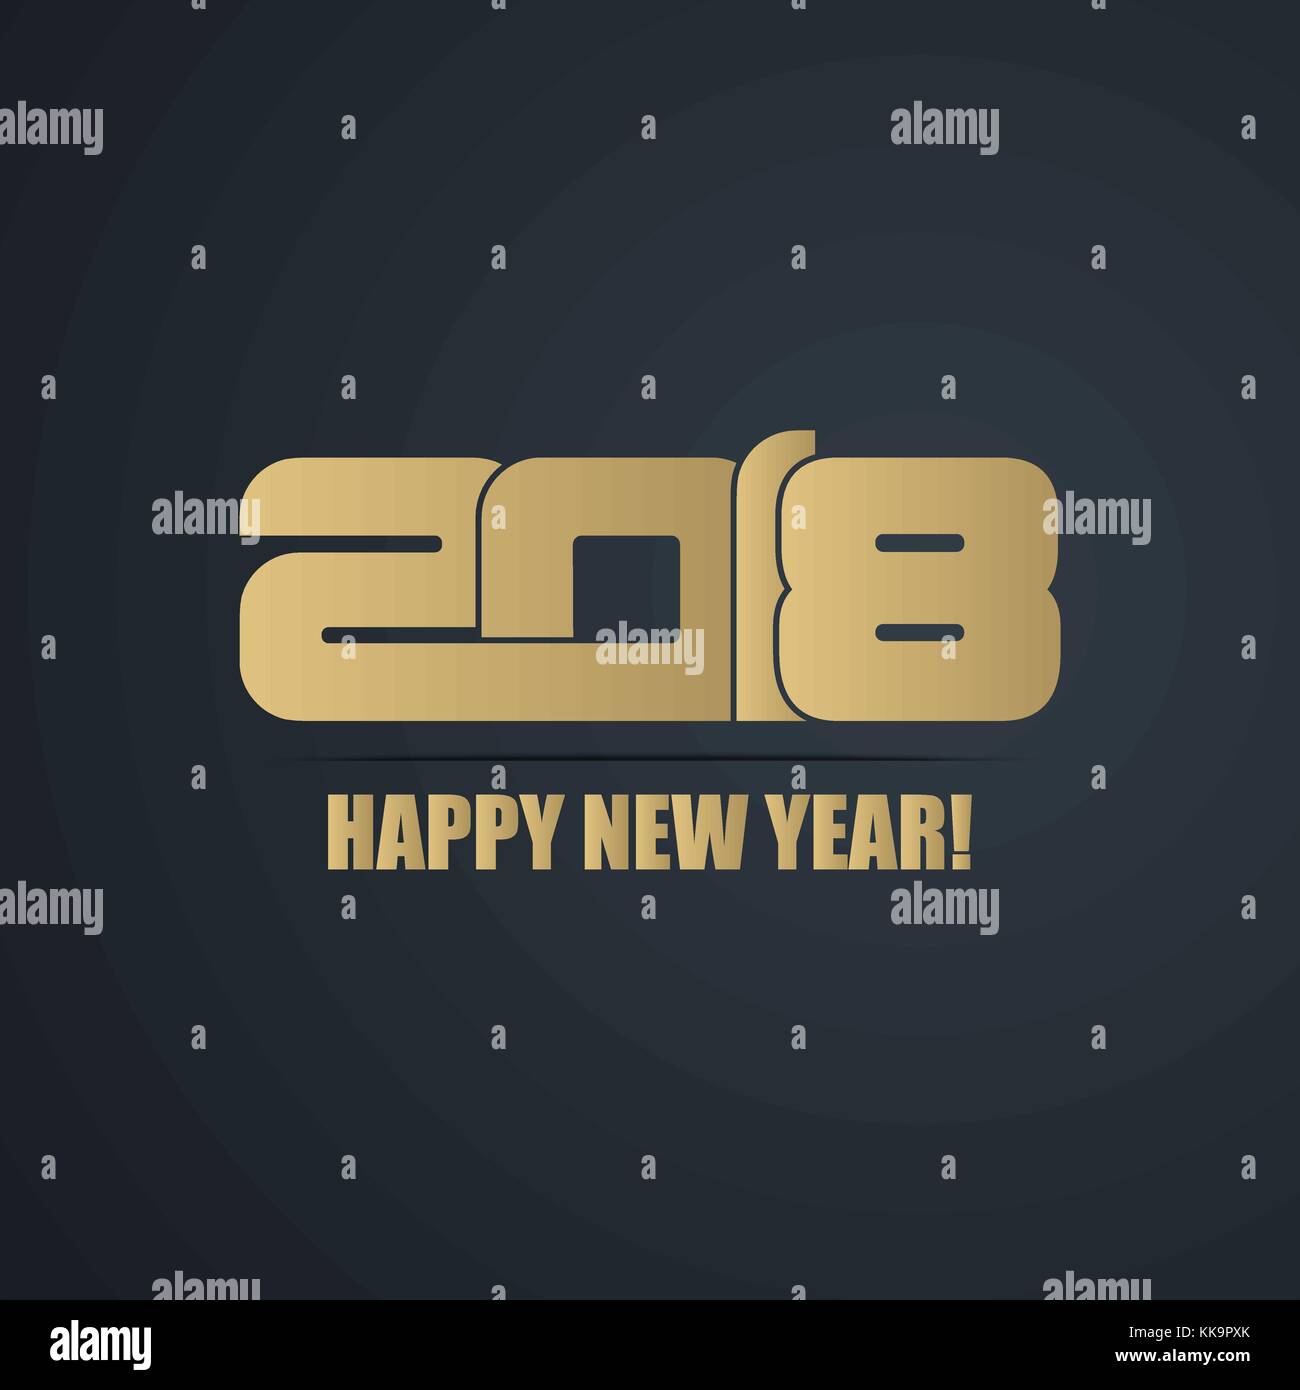 Vector illustration of Happy New Year 2018 creative background for your greeting card design Stock Vector